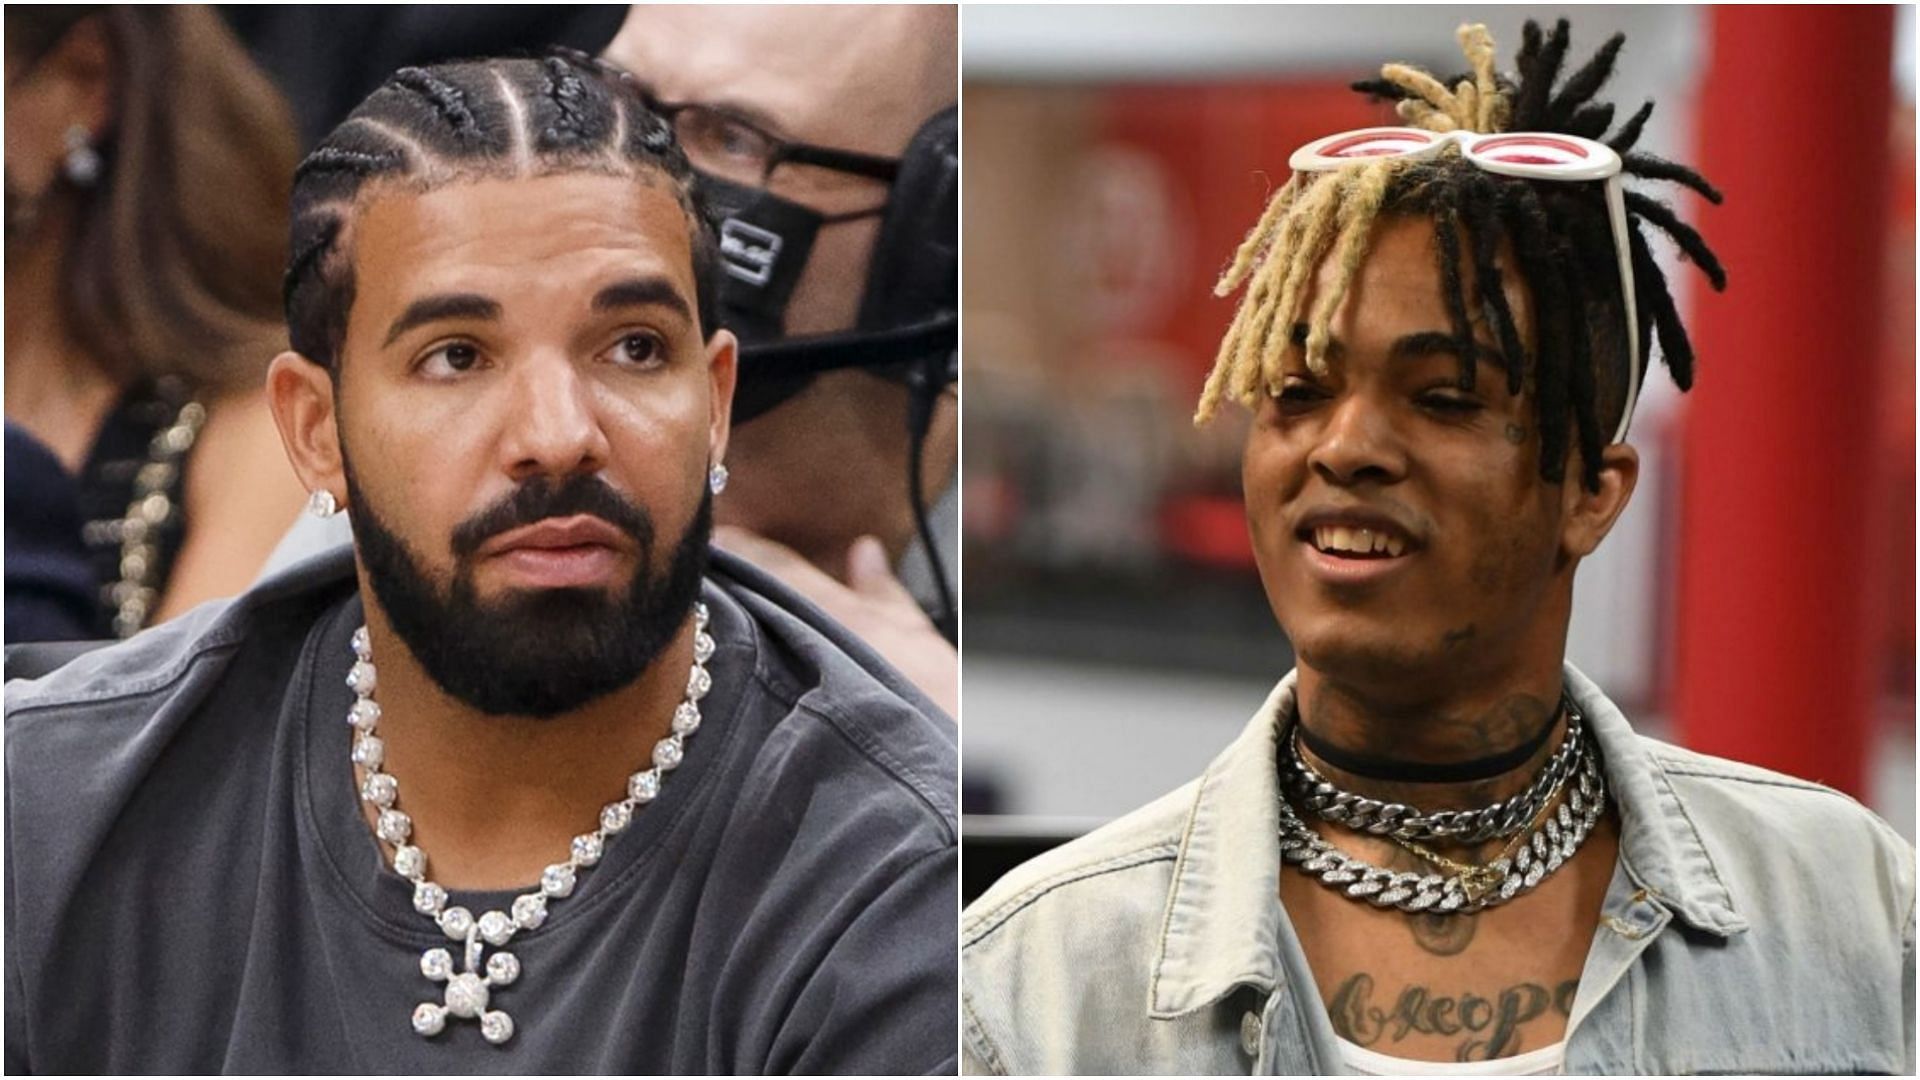 Drake has been named as a potential witness in XXXTentacion murder case. (Images via Getty)